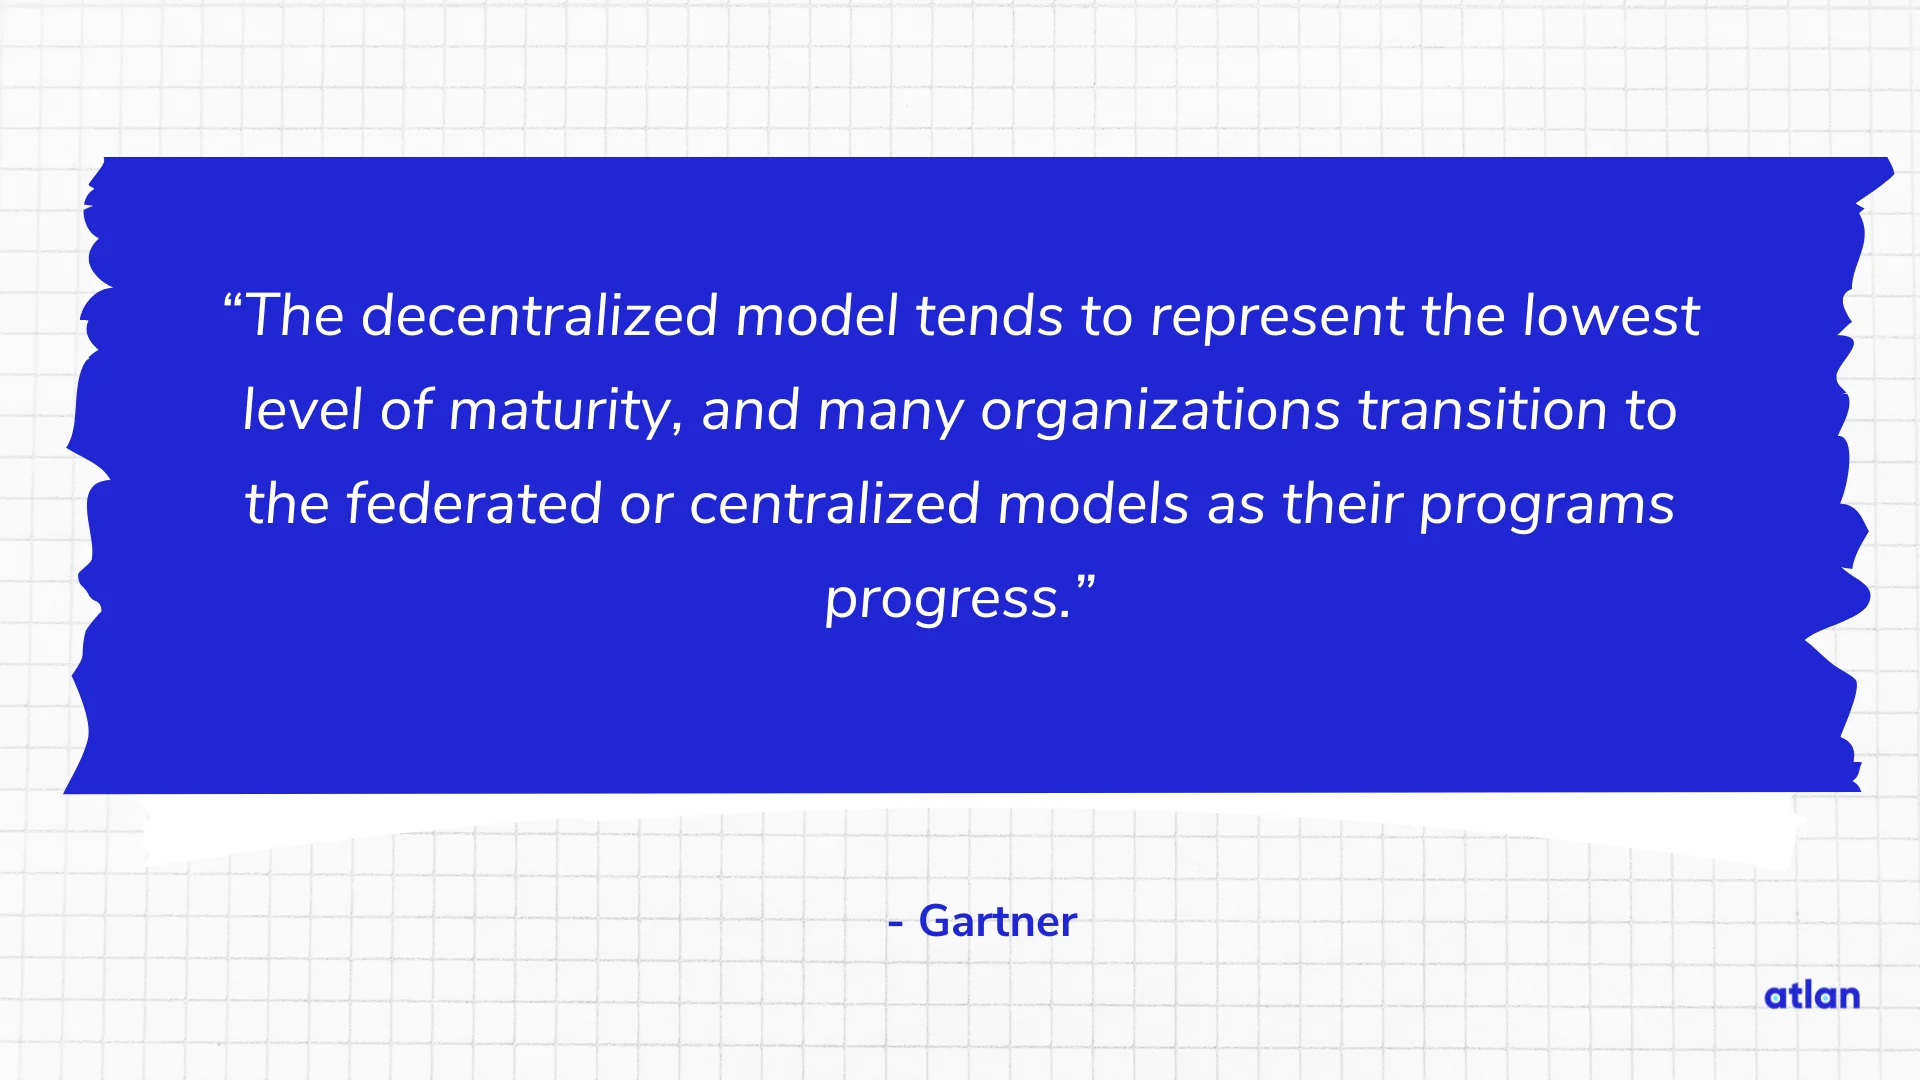 The decentralized model tends to represent the lowest level of maturity, and many organizations transition to the federated or centralized models as their programs progress